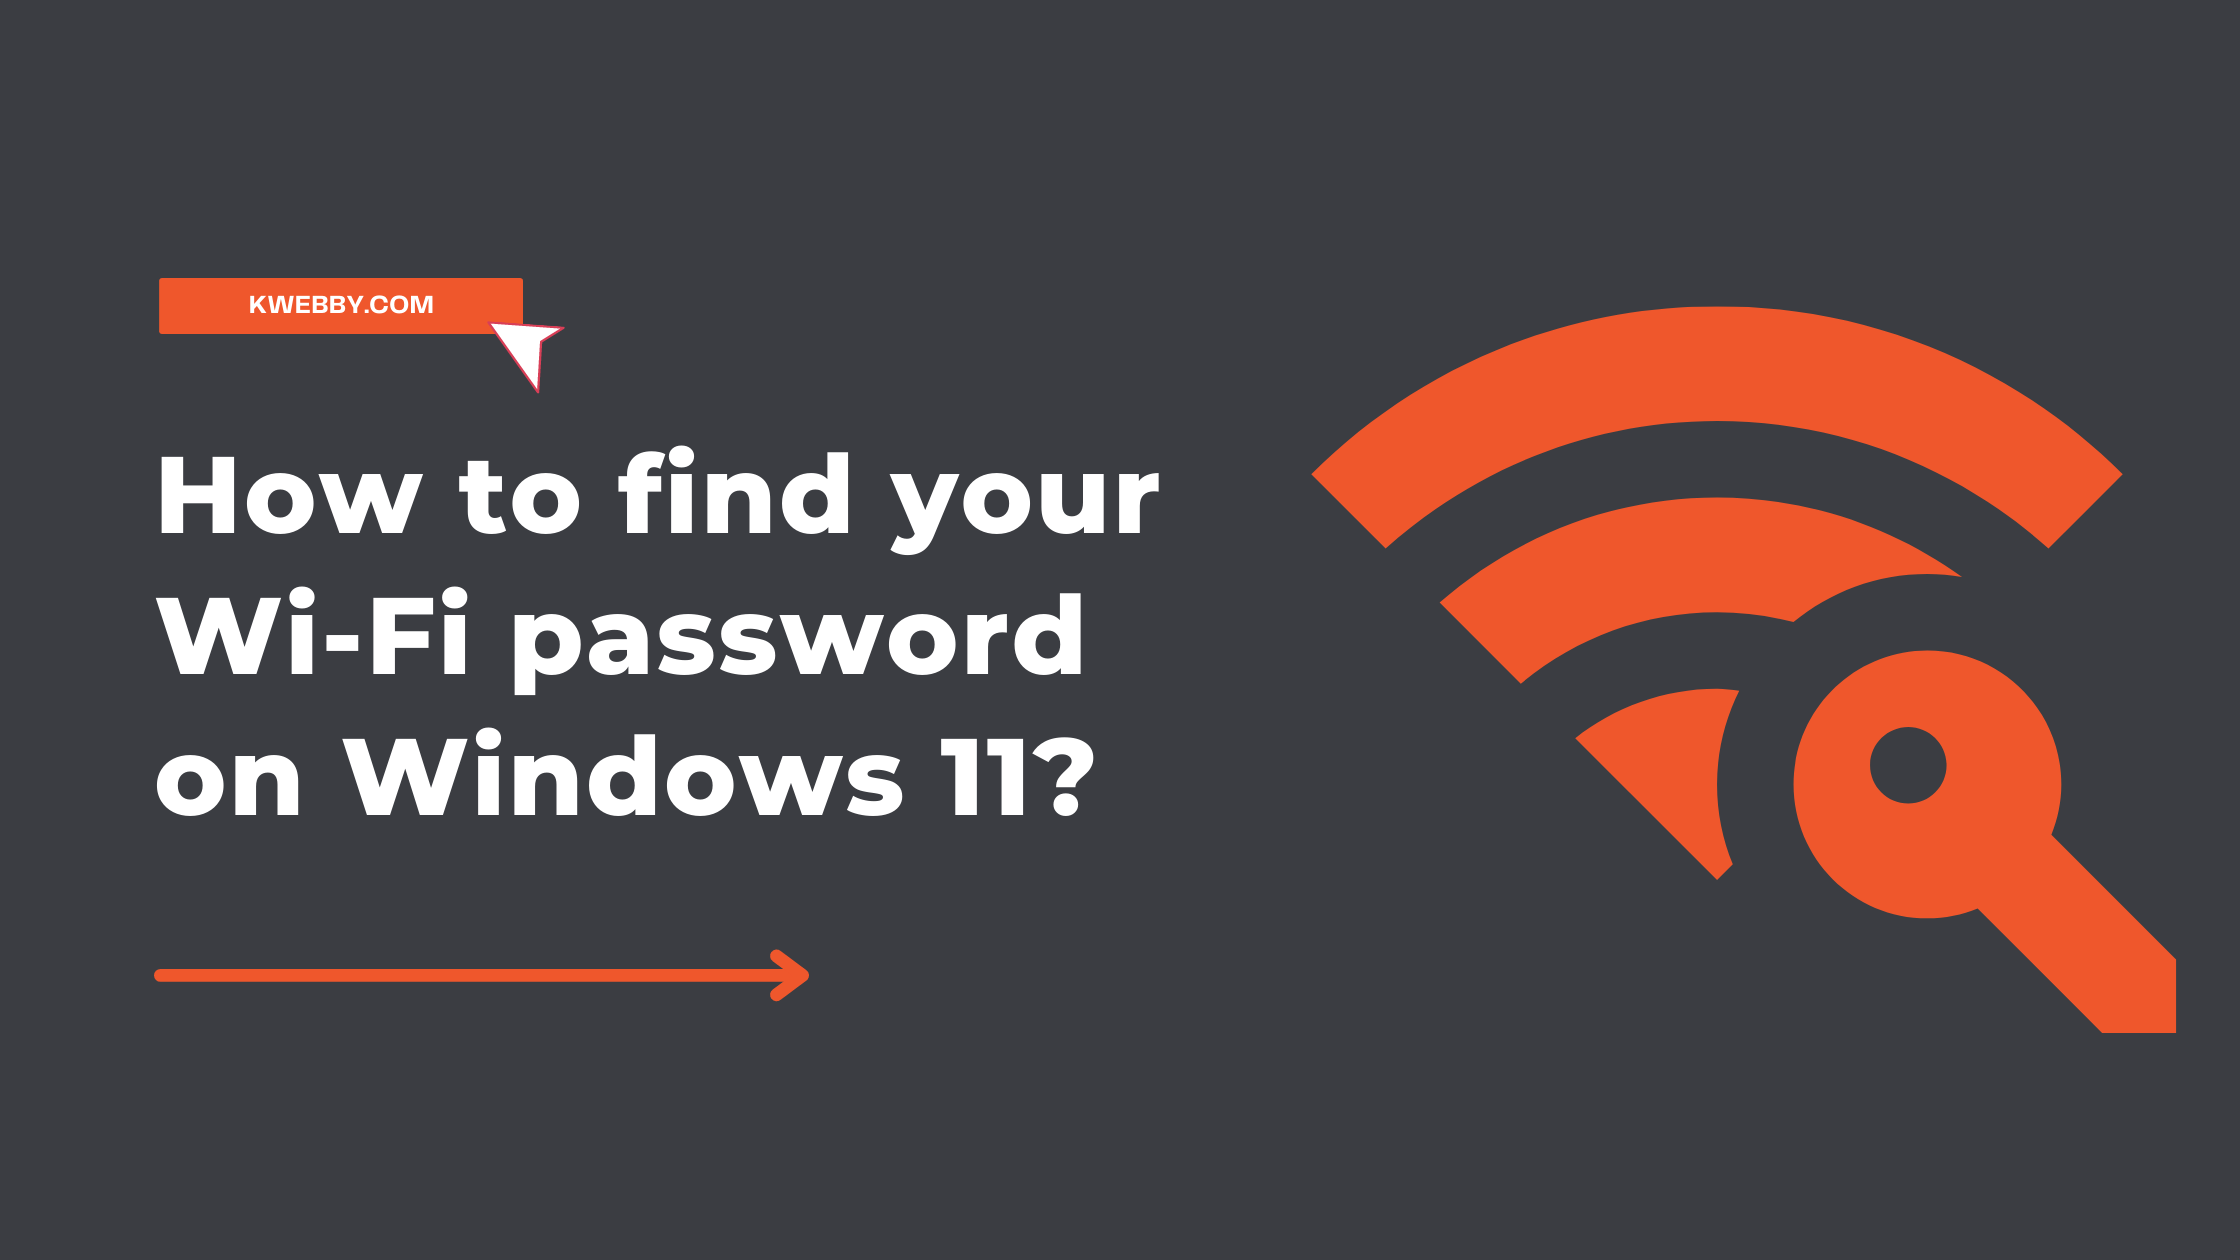 How to find your Saved WiFi password Easy on Windows 11?